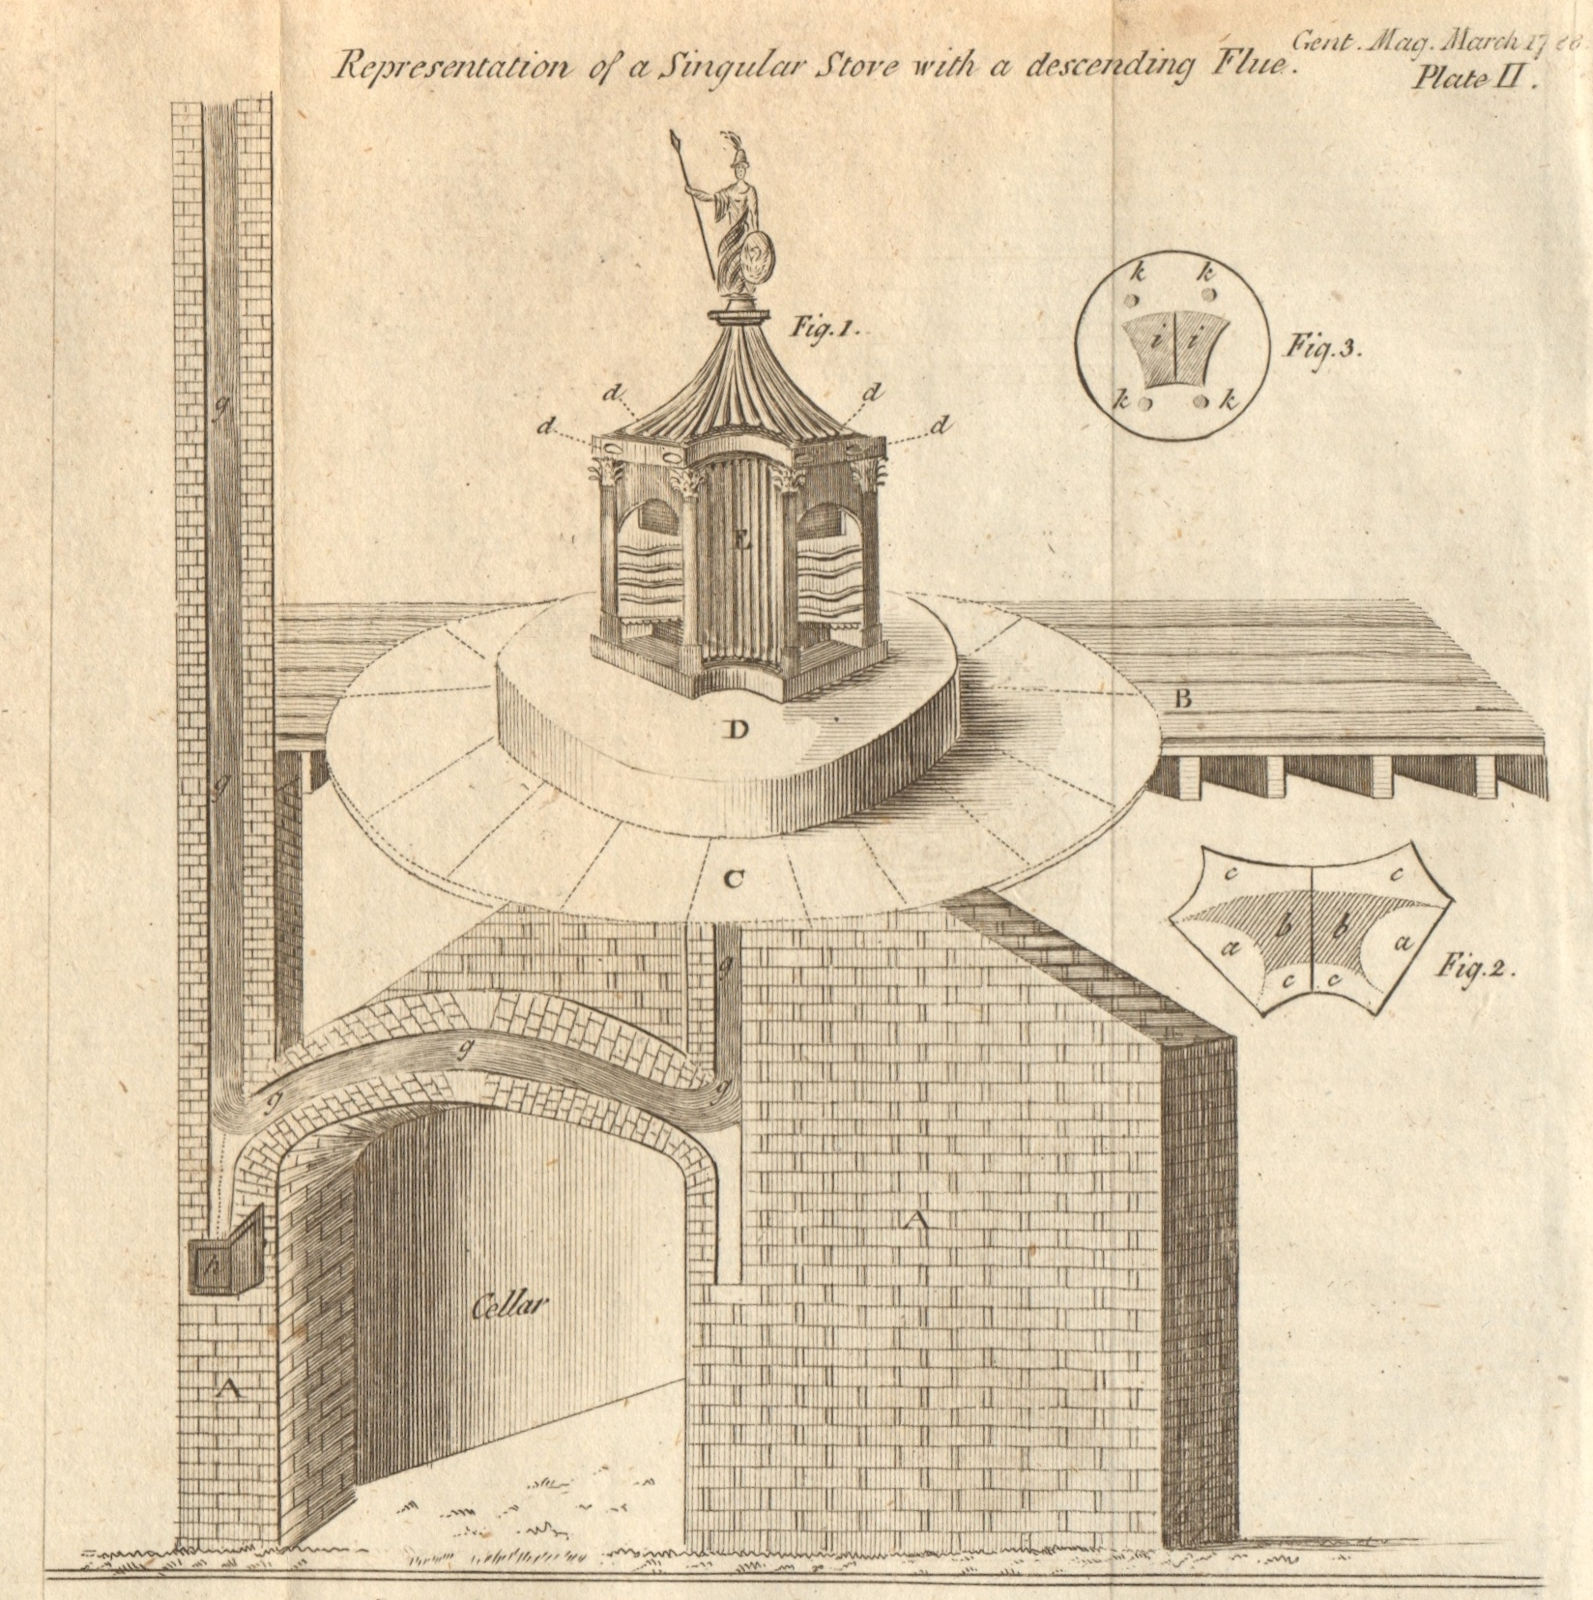 Associate Product Representation of a singular stove with a descending flue 1788 old print